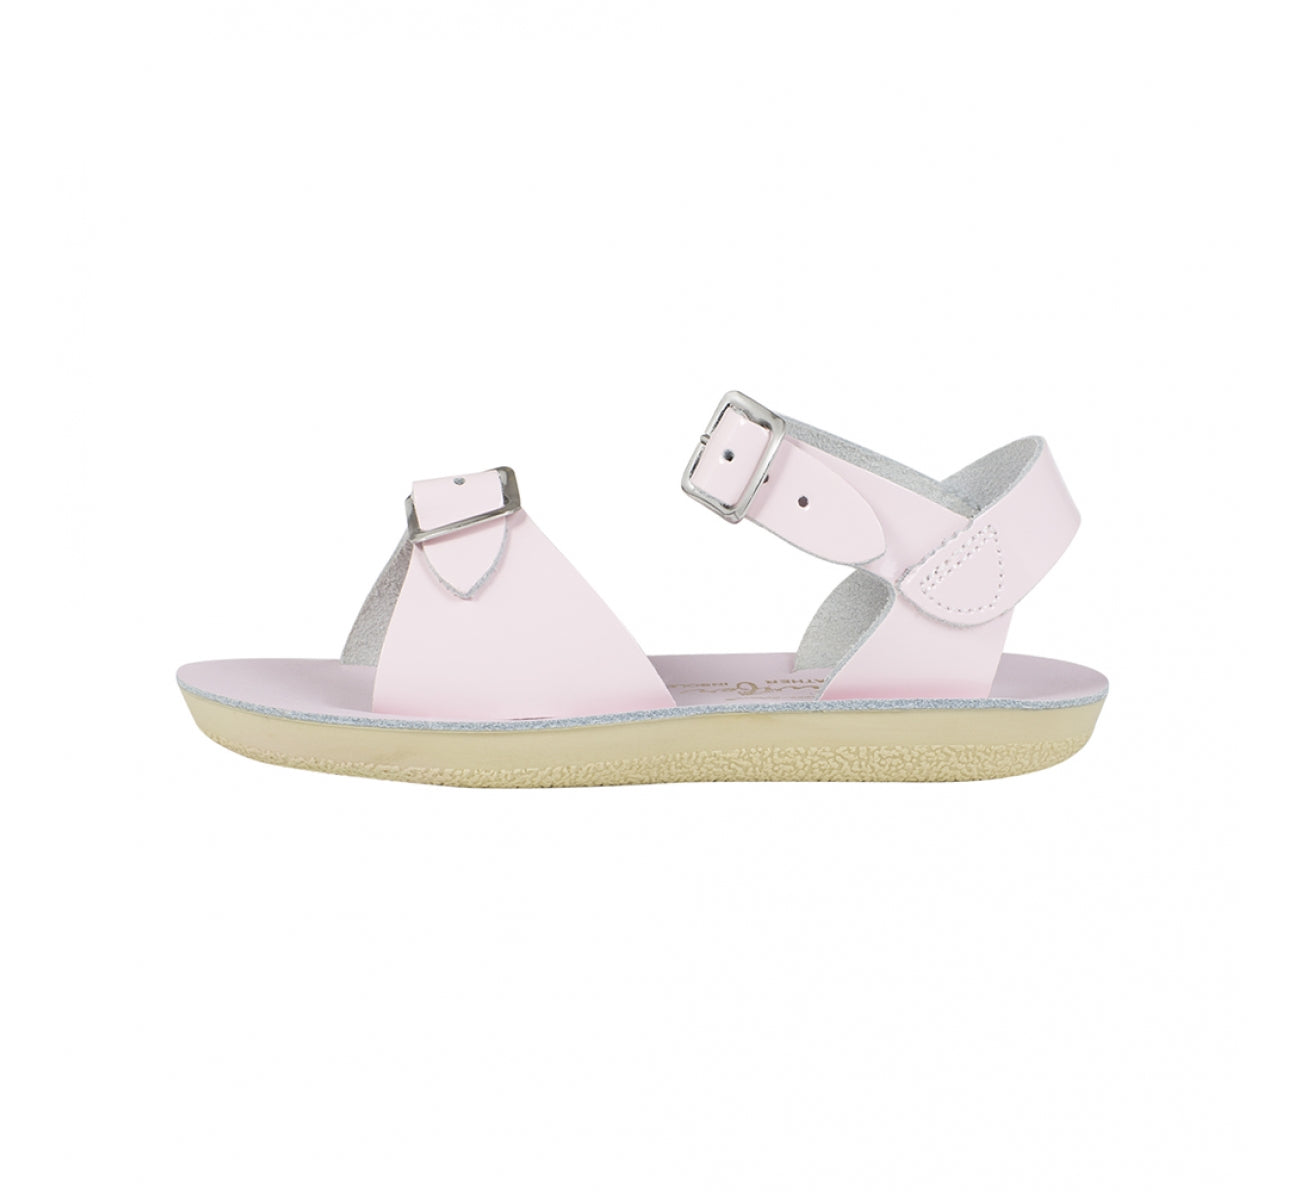 Sun San Saltwater Sandals Surfer - Shiny Pink – Casp Baby Mommy & Me ...